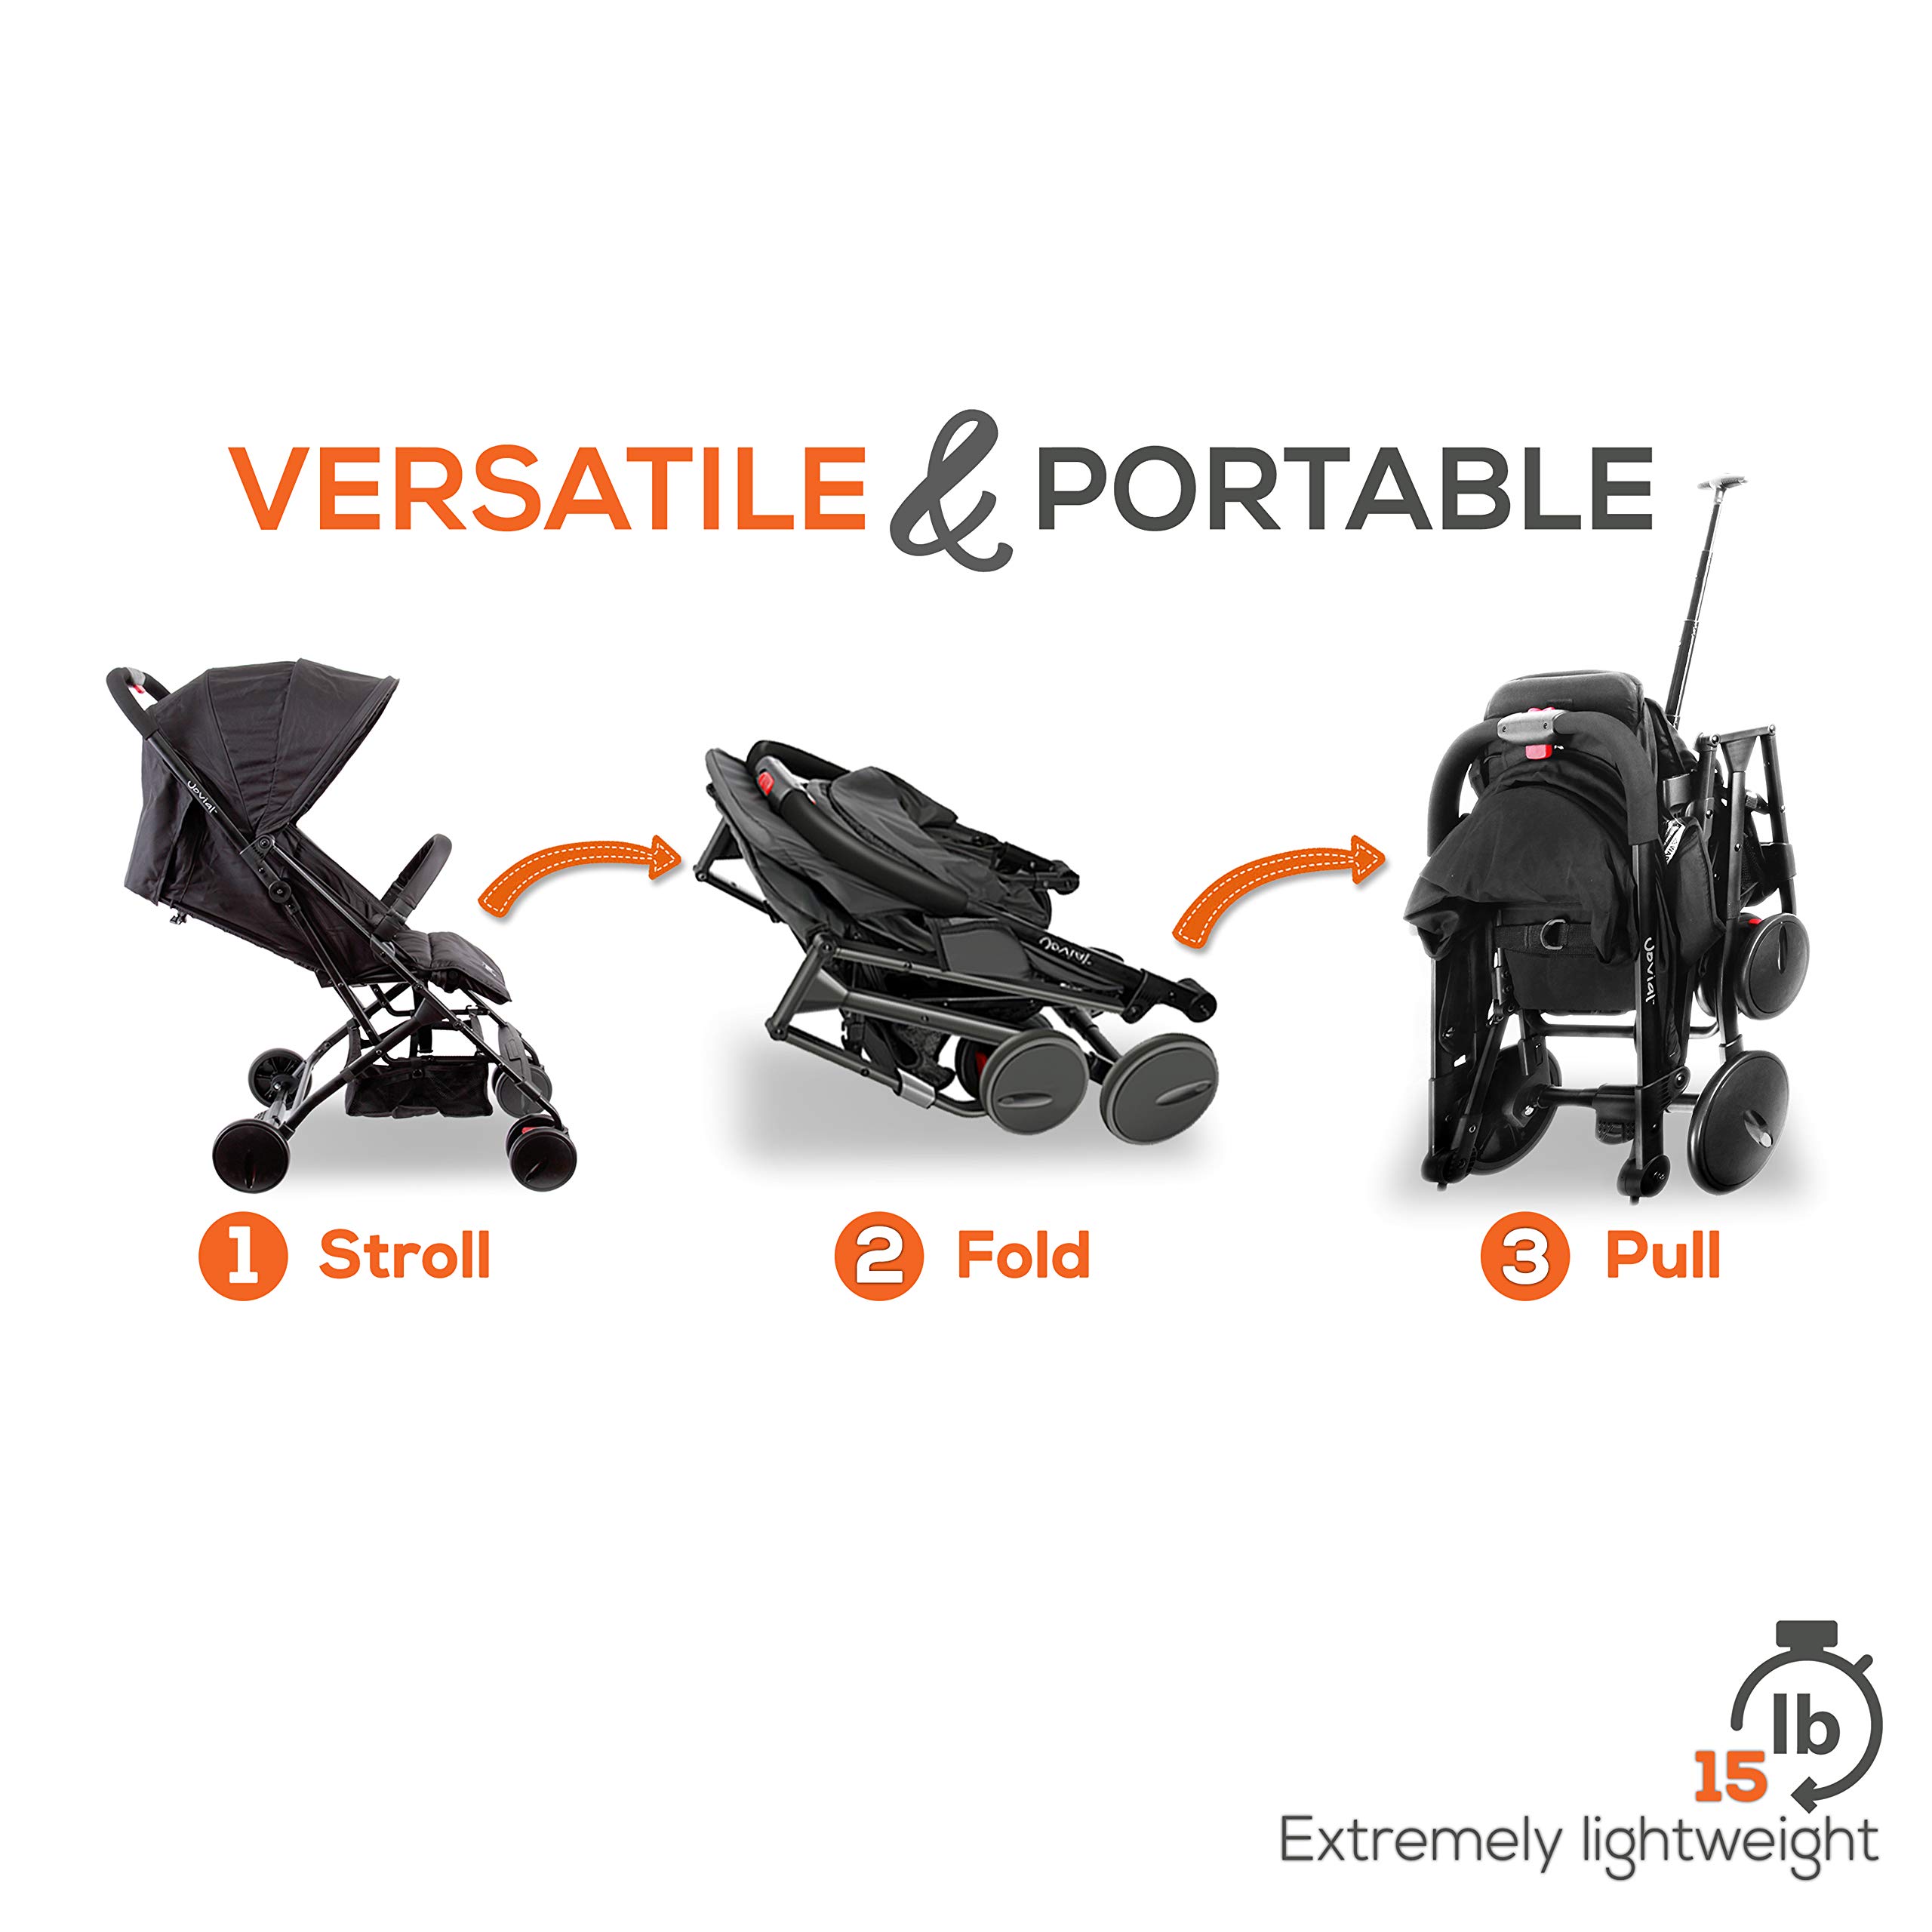 Portable Folding Lightweight Baby Stroller - Smallest Foldable Compact Stroller Airplane Travel, Compact Storage, 5-Point Safety, Easy 1 Hand Fold, Canopy Sun Shade, Storage Bag - Jovial JPC20BK